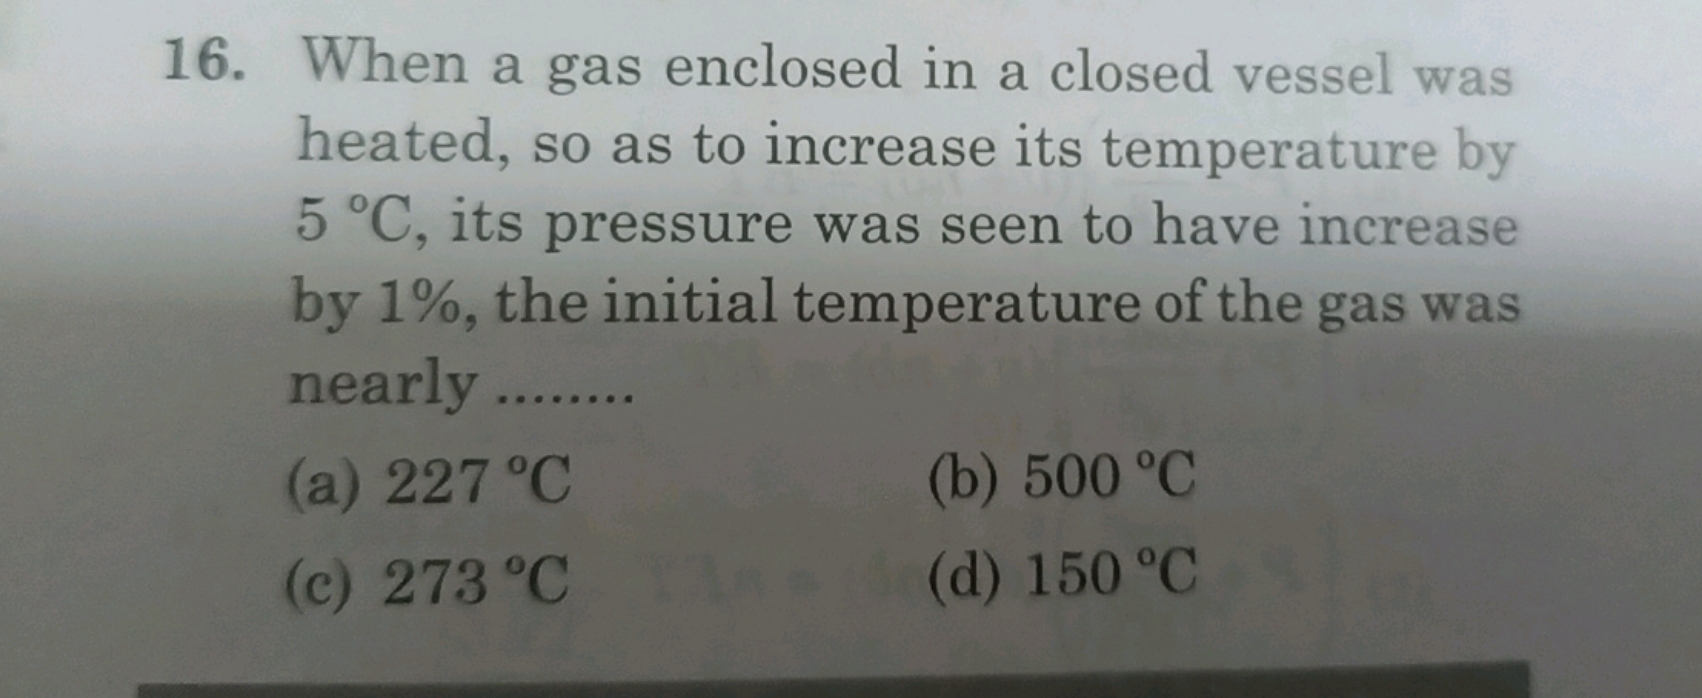 When a gas enclosed in a closed vessel was heated, so as to increase i